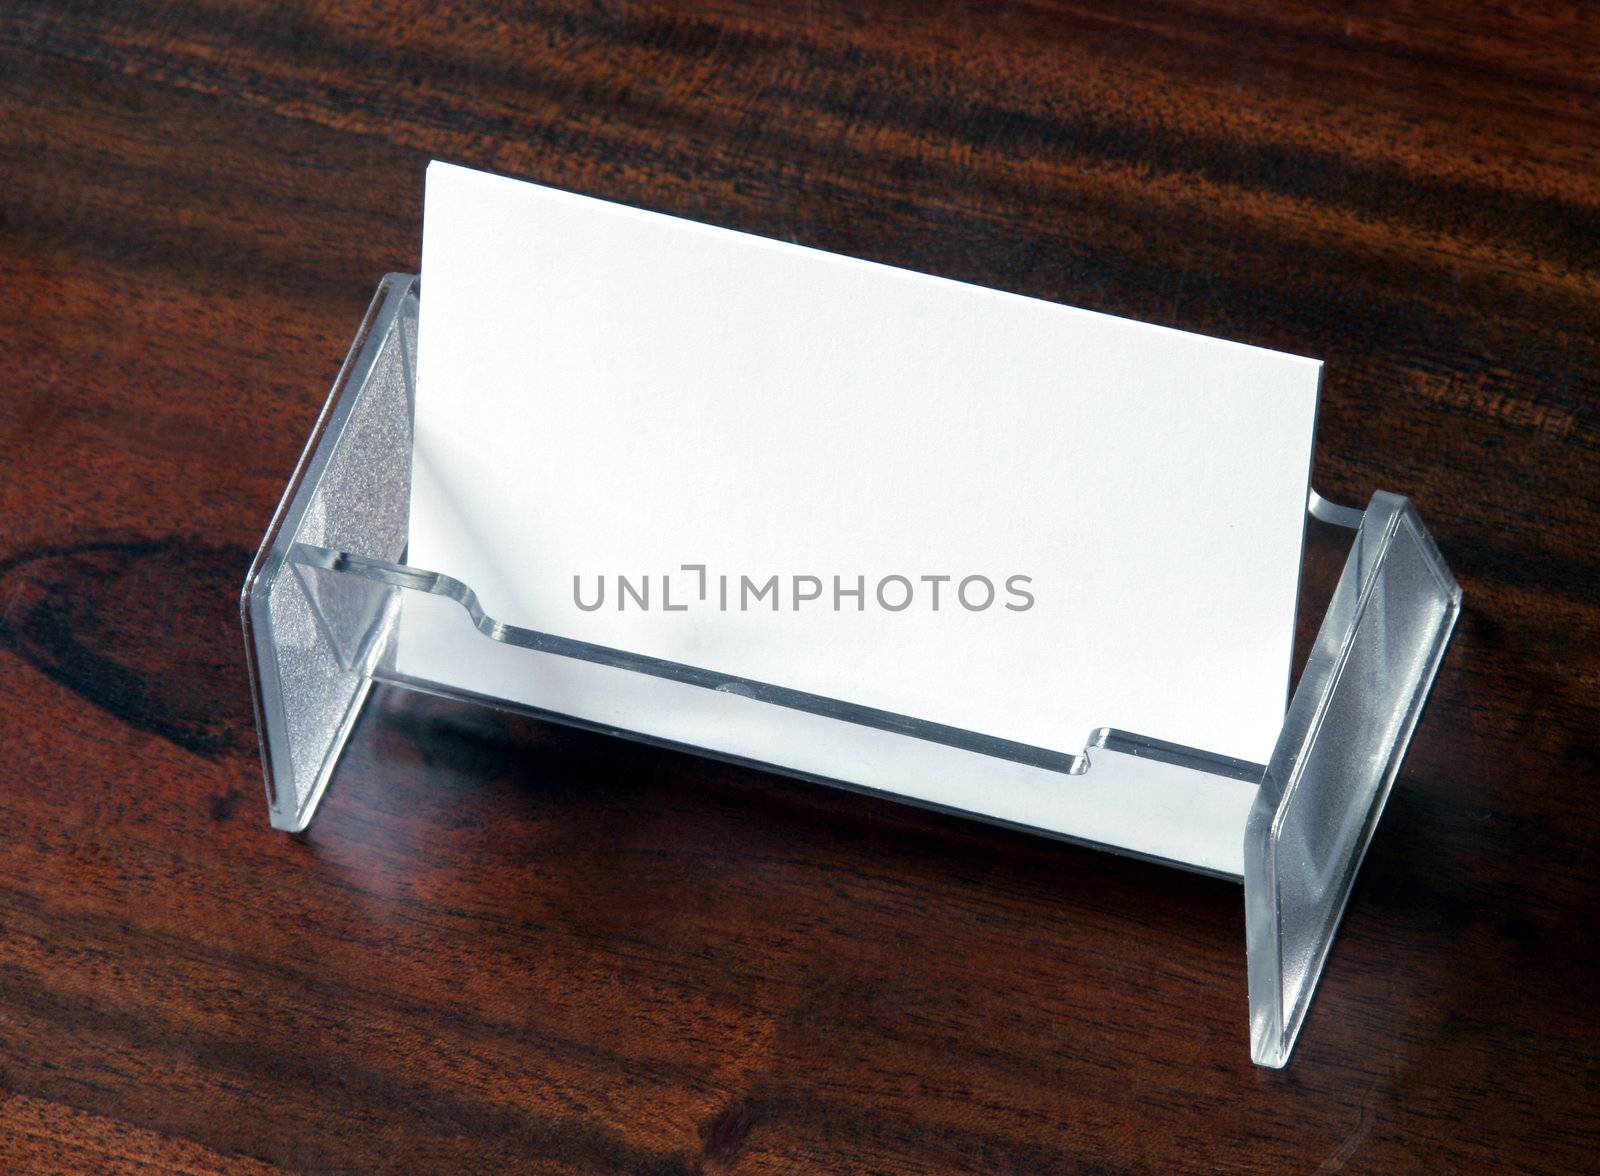 Blank Business Cards In Transparent Card Holder On Dark Wood Table